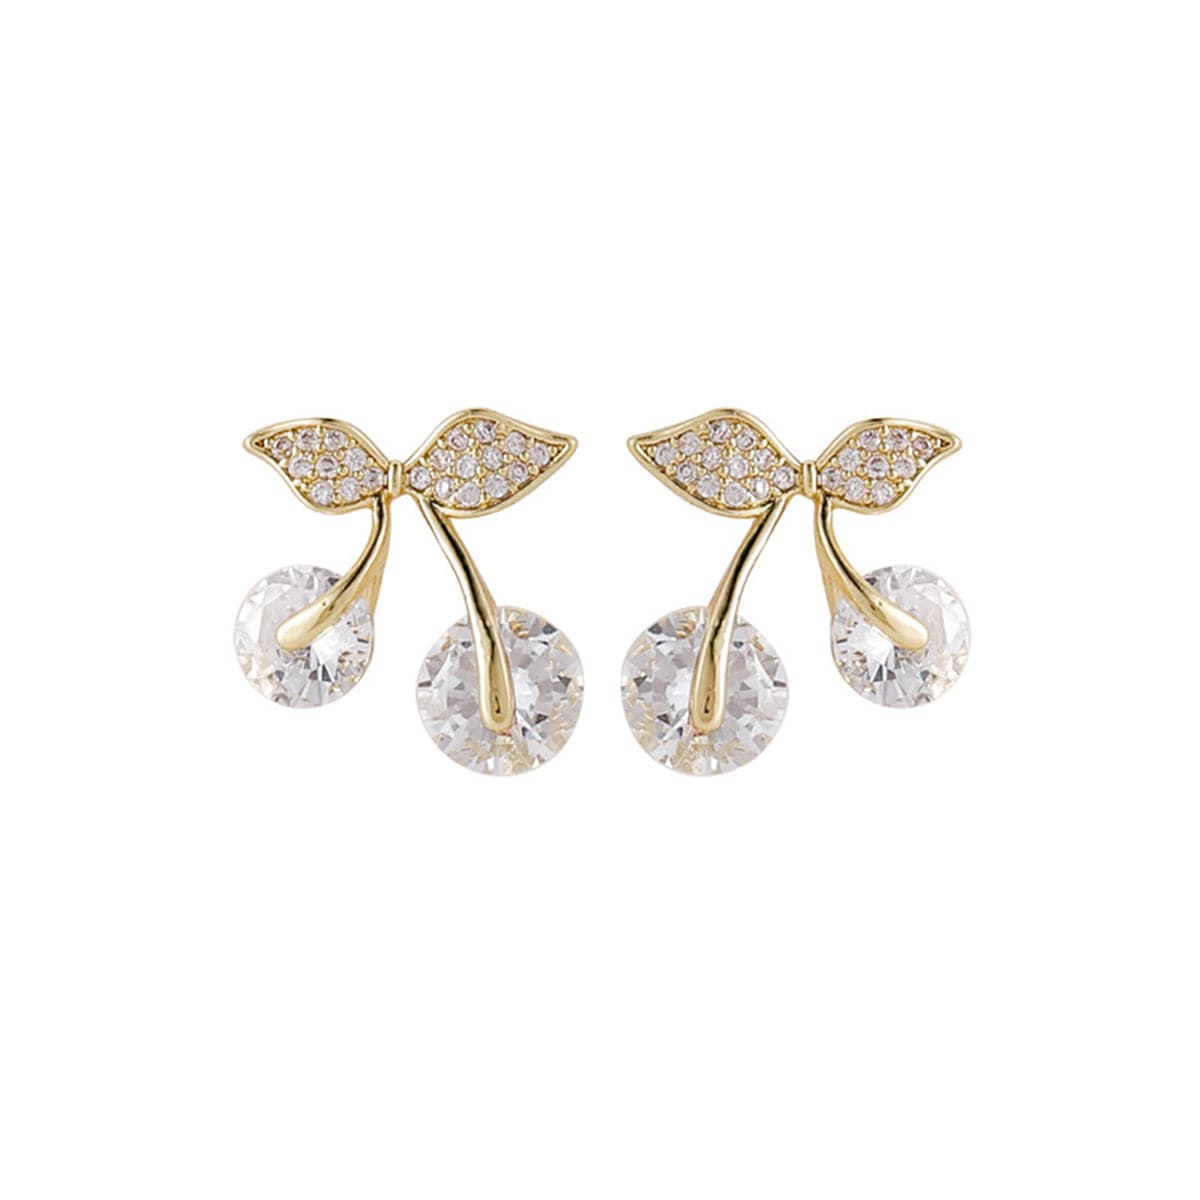 Cubic Zirconia & Crystal 18K Gold-Plated Cherry Stud Earrings